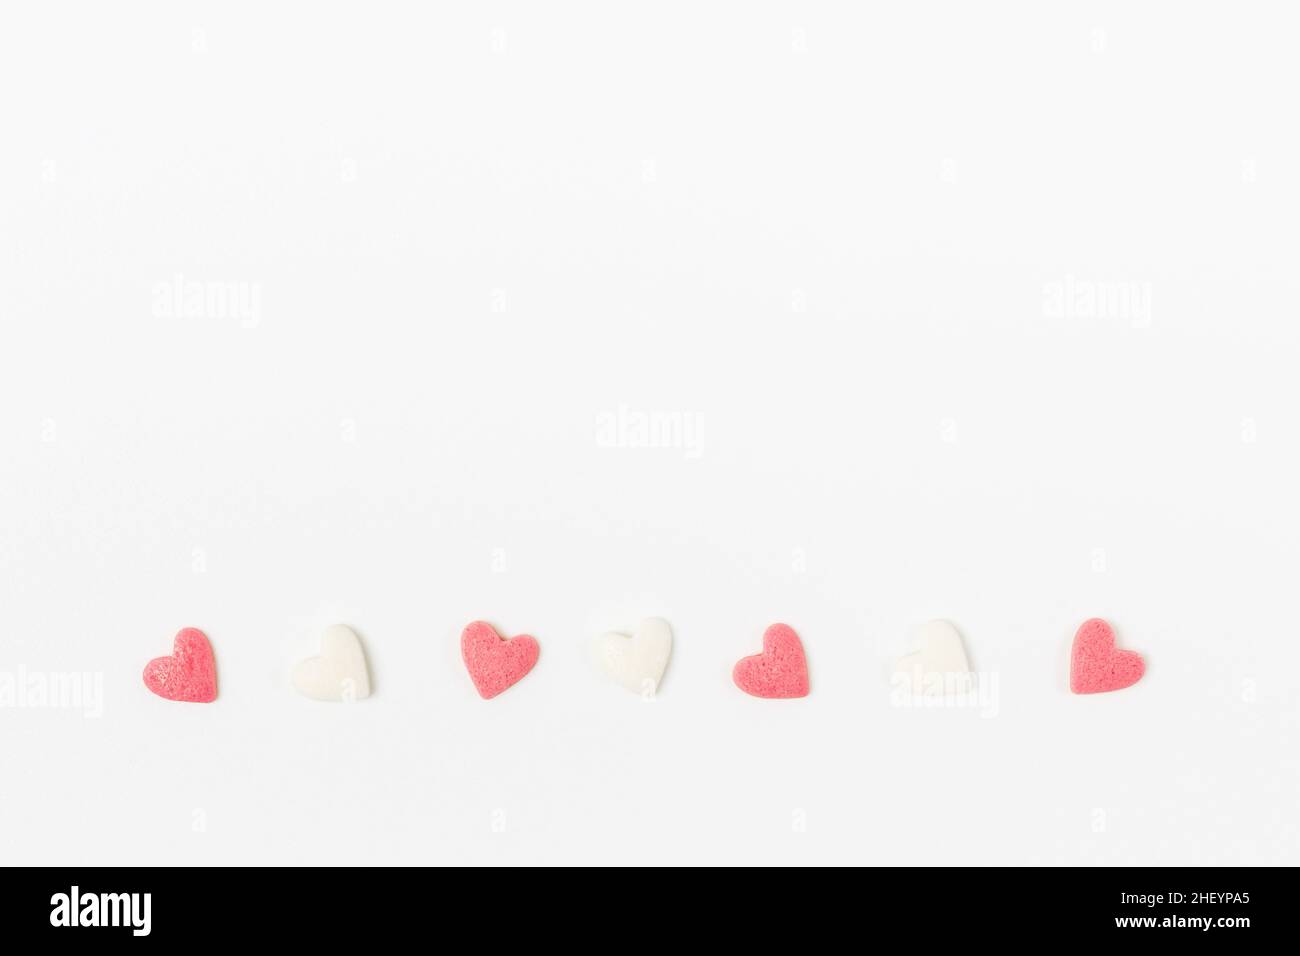 Pink and white heart-shaped sugar candies on white background, minimalistic saint valentine`s day greeting card Stock Photo